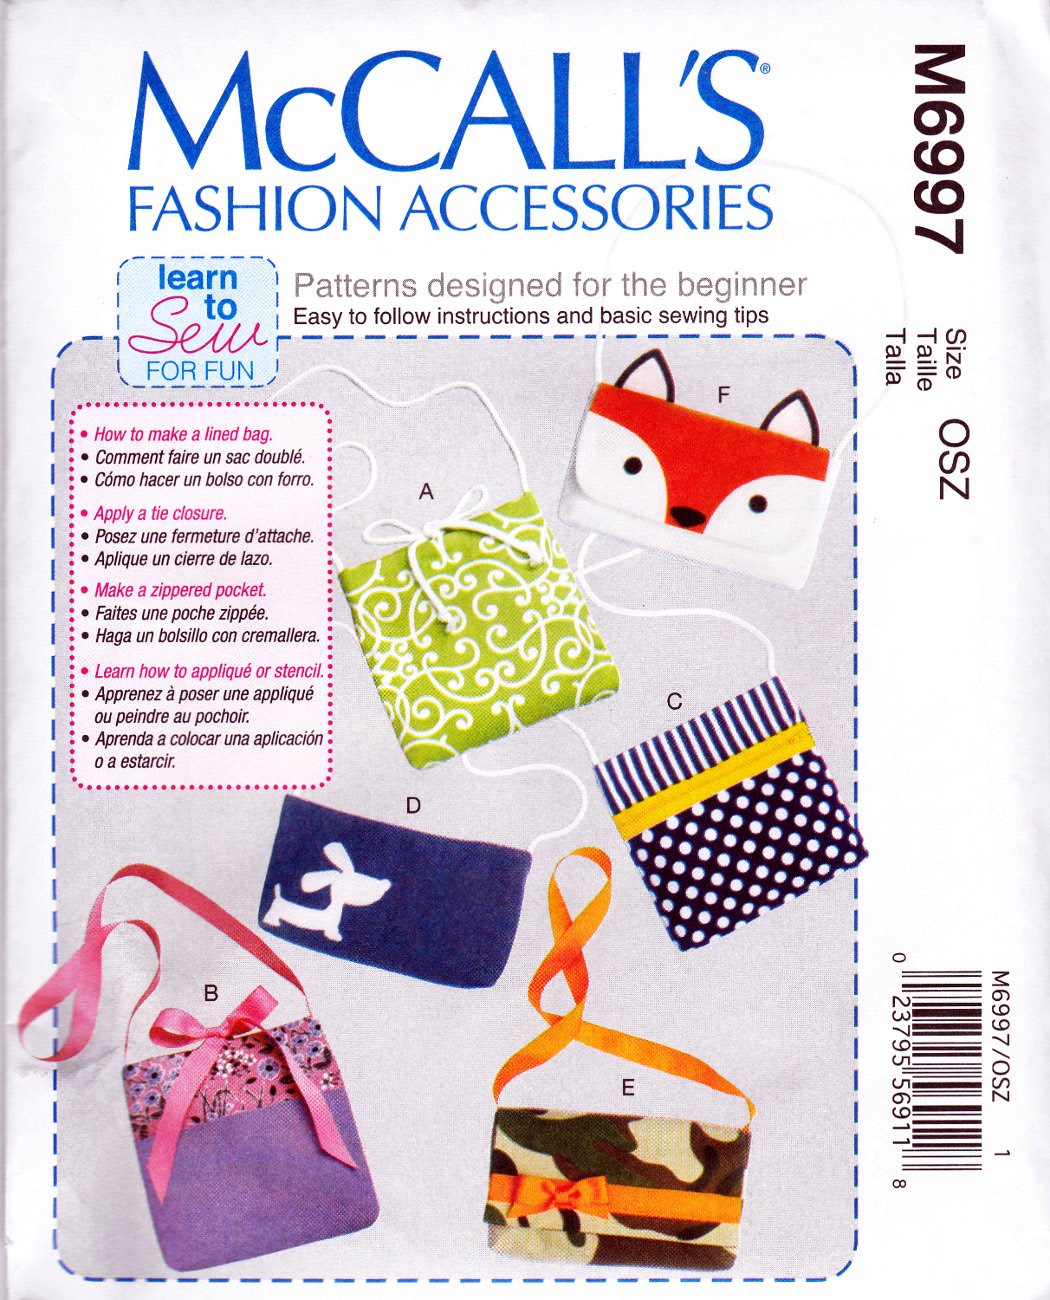 McCall's 6997 M6997 Fashion Accessories Sewing Pattern Bags Purses Totes Learn To Sew Girls Size OSZ